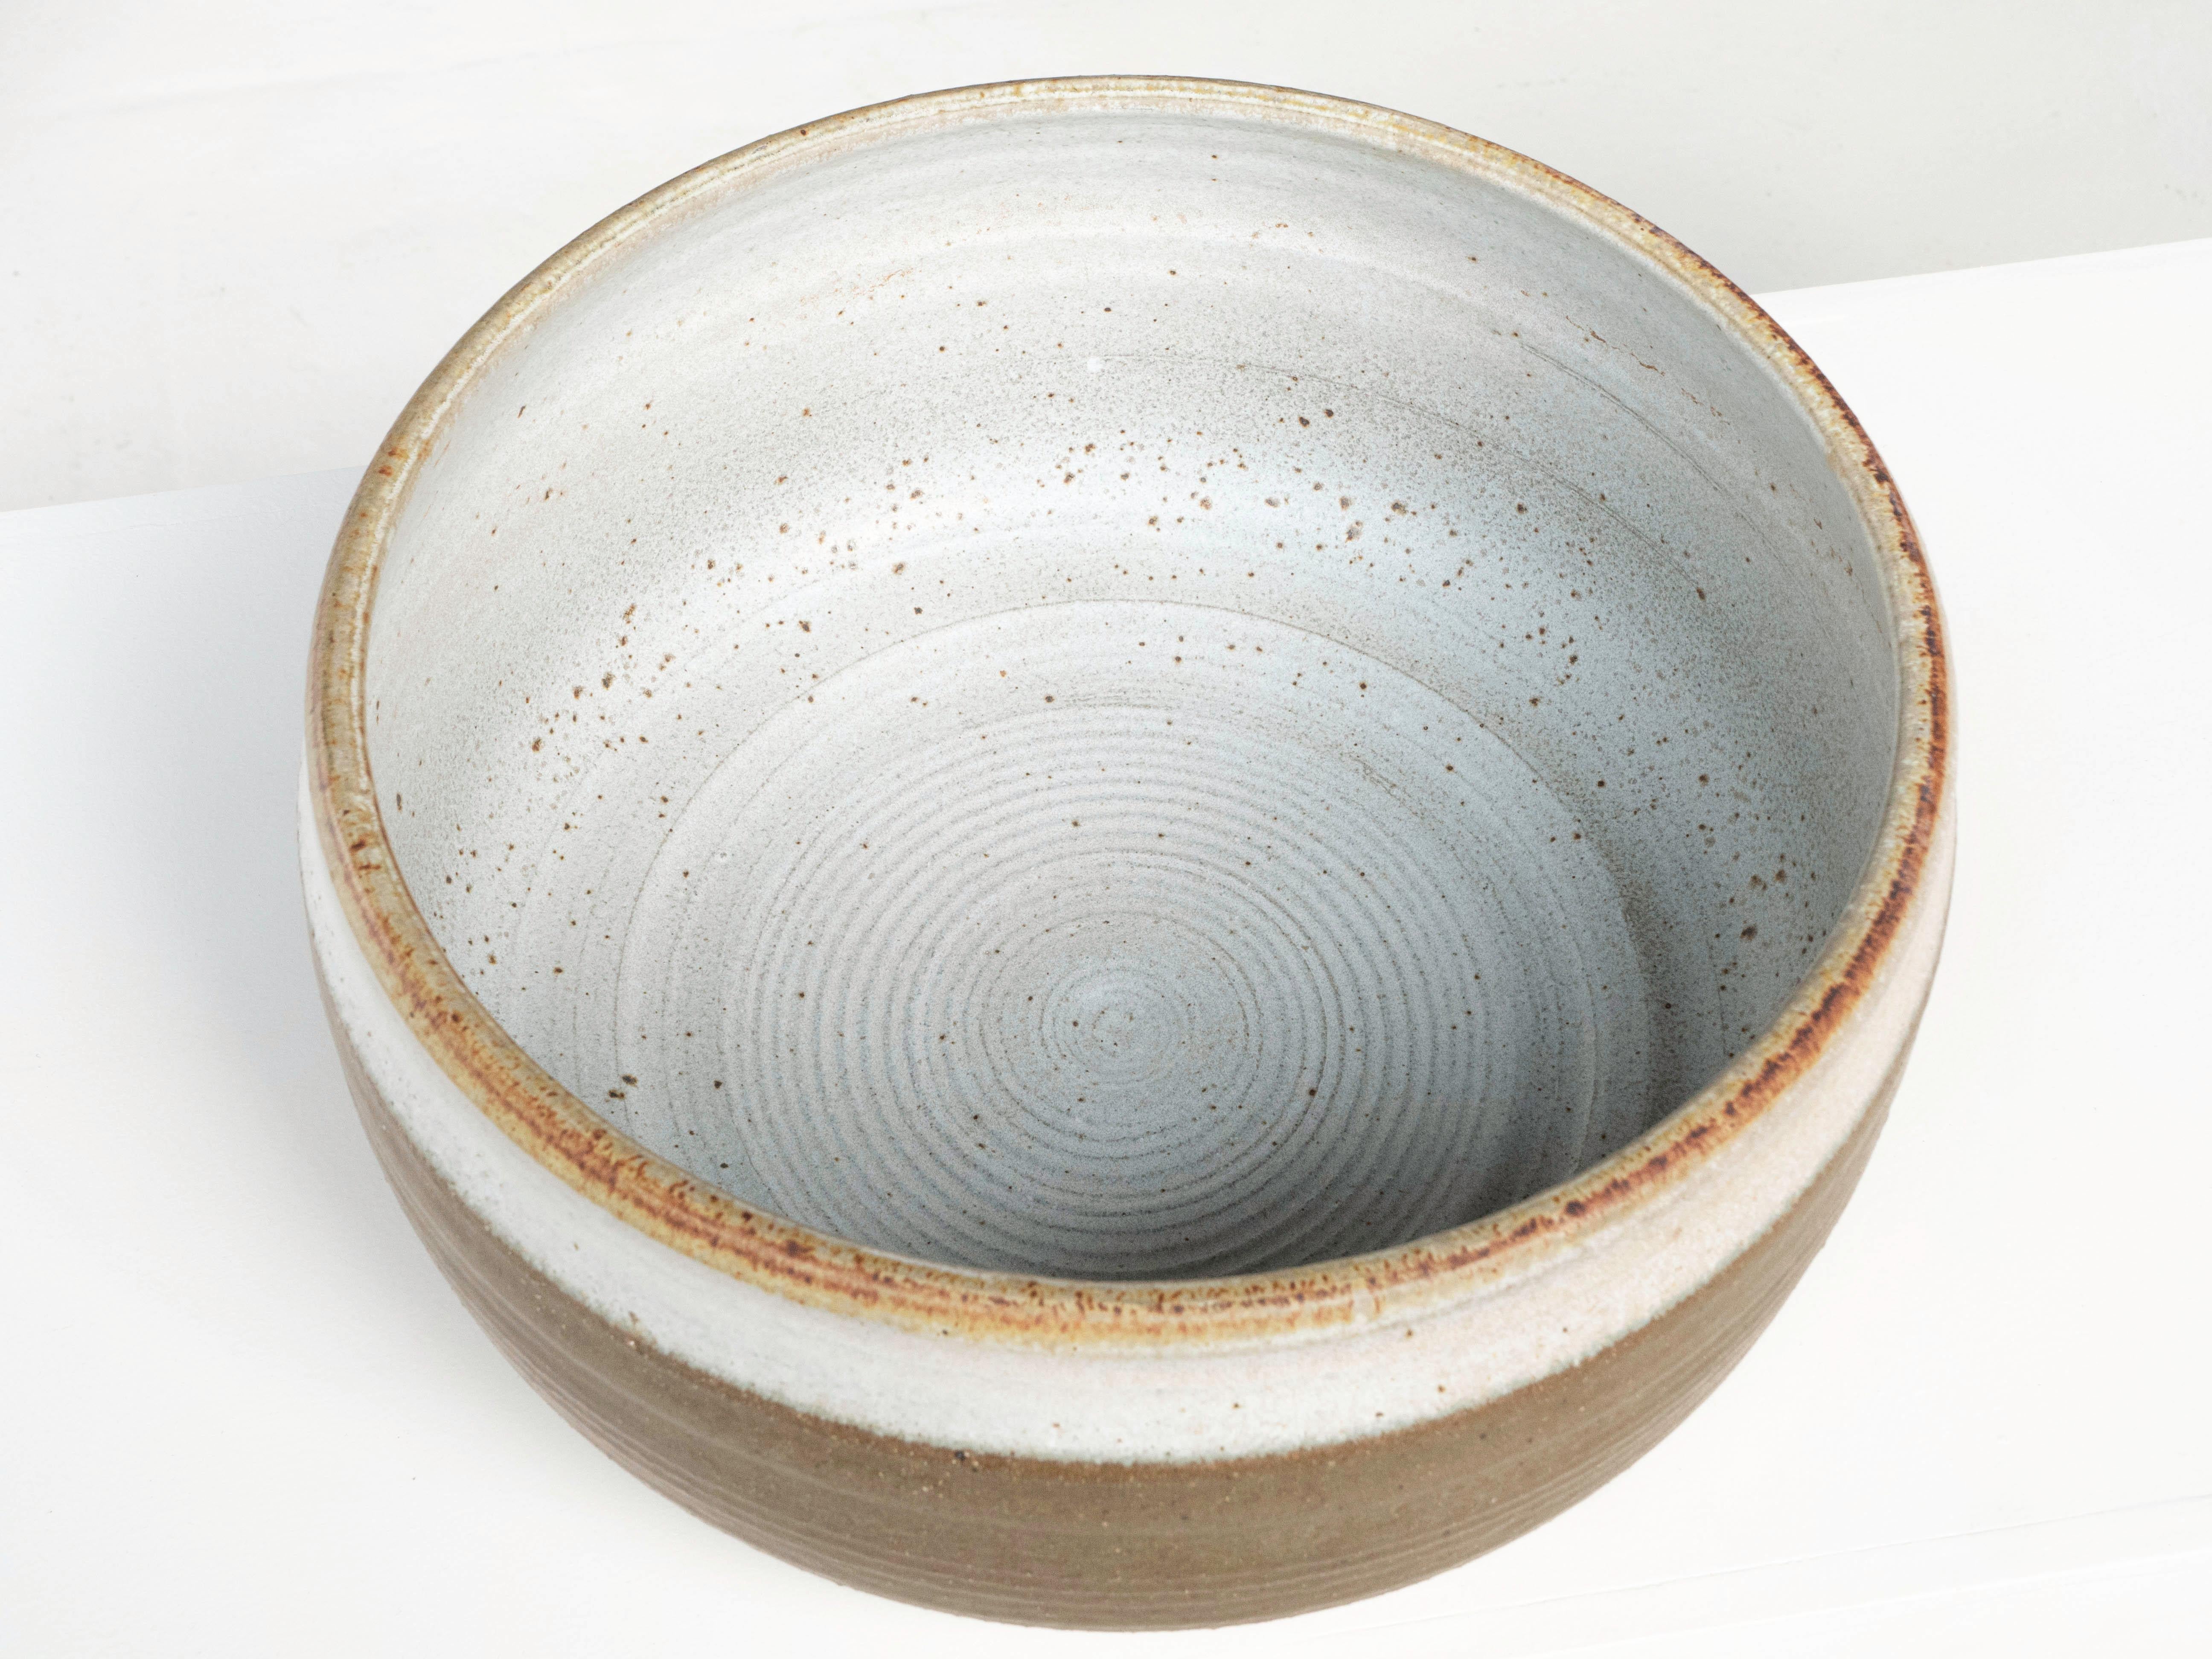 A hand thrown bowl shaped planter by ceramist Bob Kinzie for his company Affiliated Craftsmen, California 1960's. The upper portion of the piece has a dark green glaze with espresso colored specks while the bottom portion shows exposed stoneware.